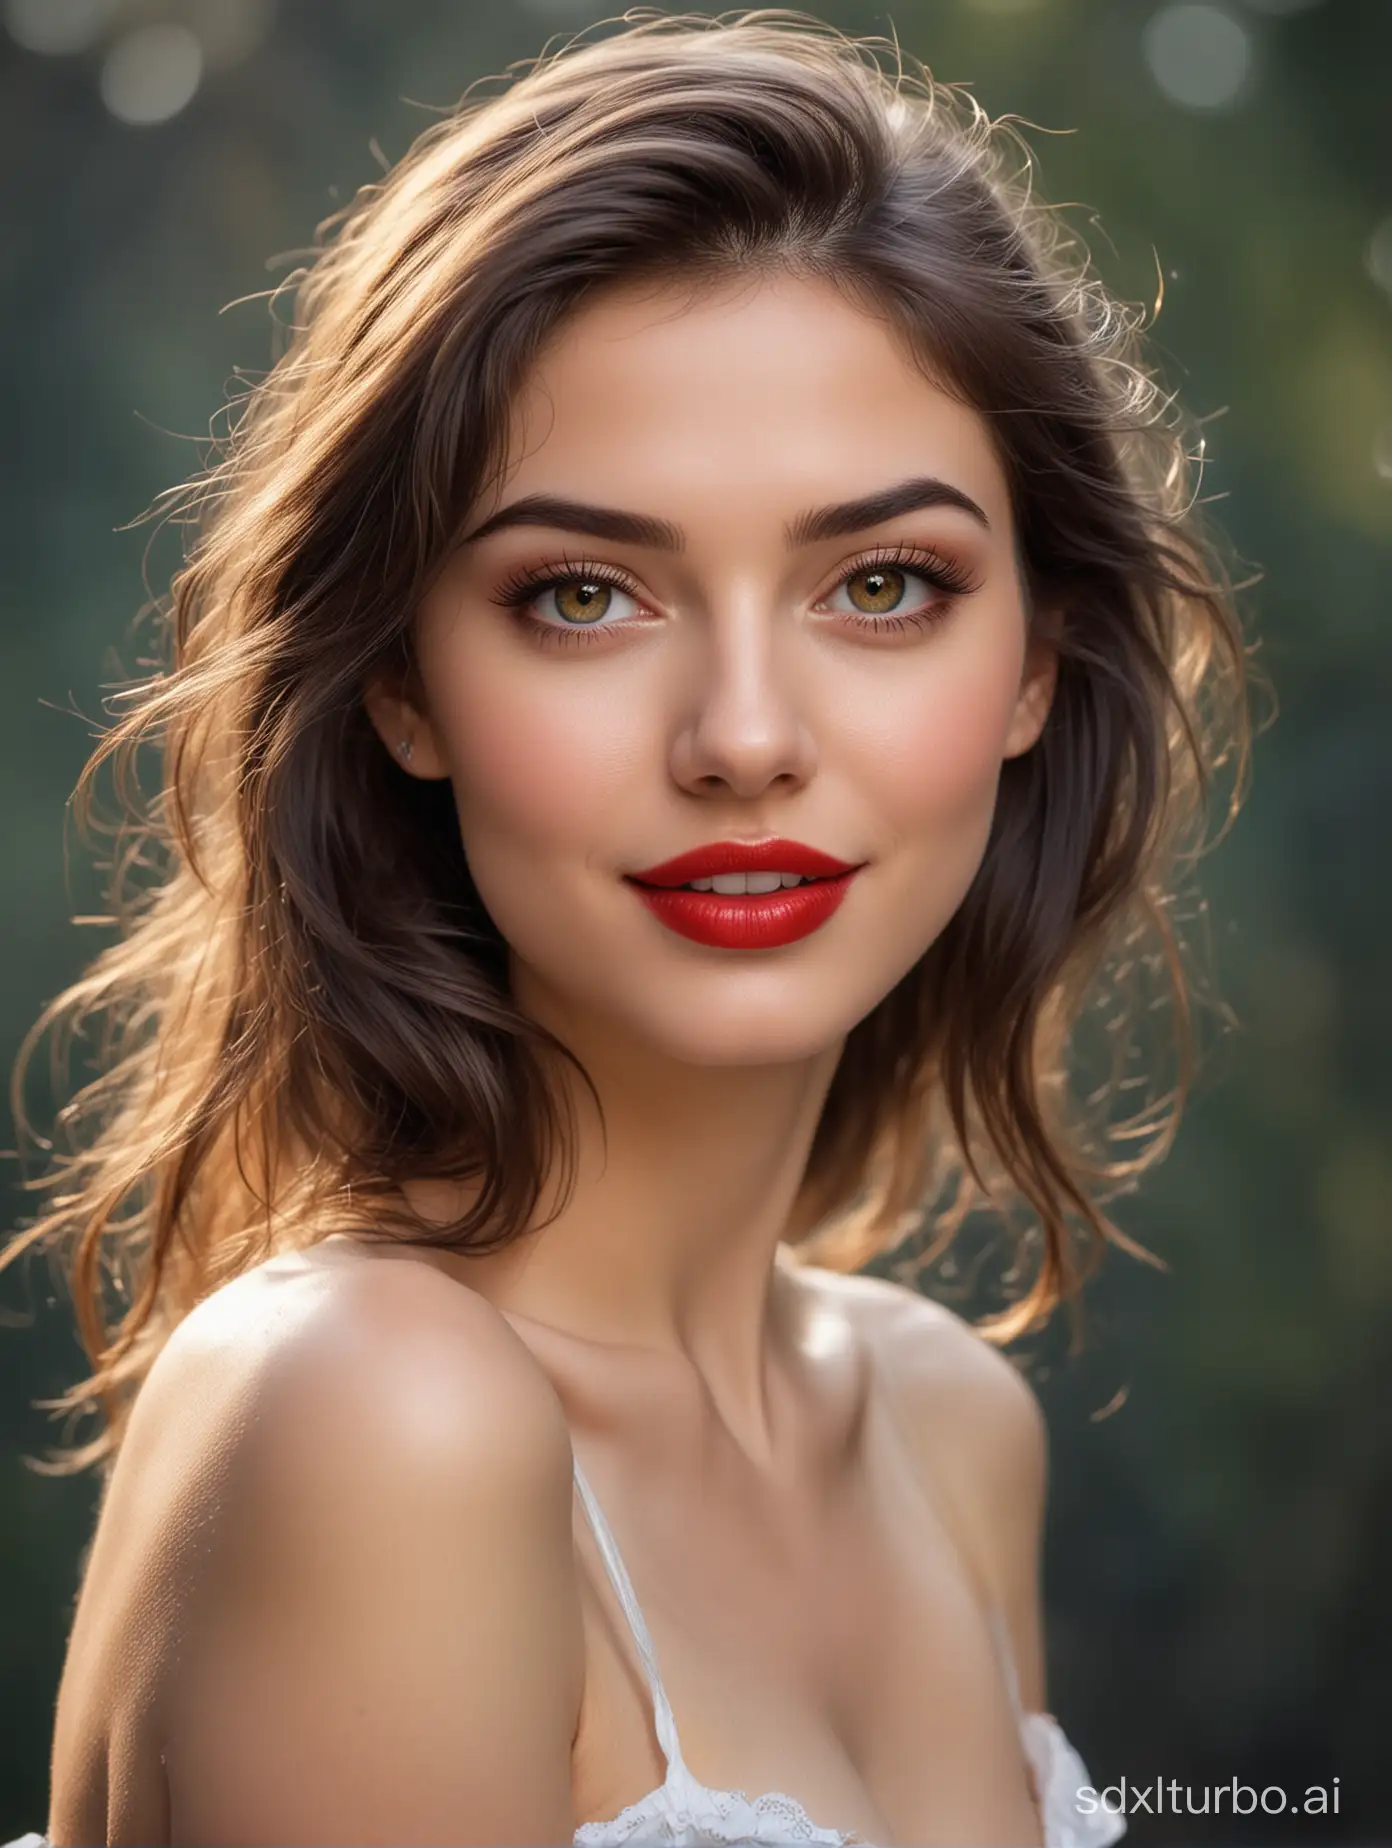 The beautiful woman's bright eyes, like bright stars, are full of wisdom and agility; and her slightly raised red lips, fair and beautiful skin, long legs, with a protruding front and raised back, are like a smiling fairy, intoxicating people.